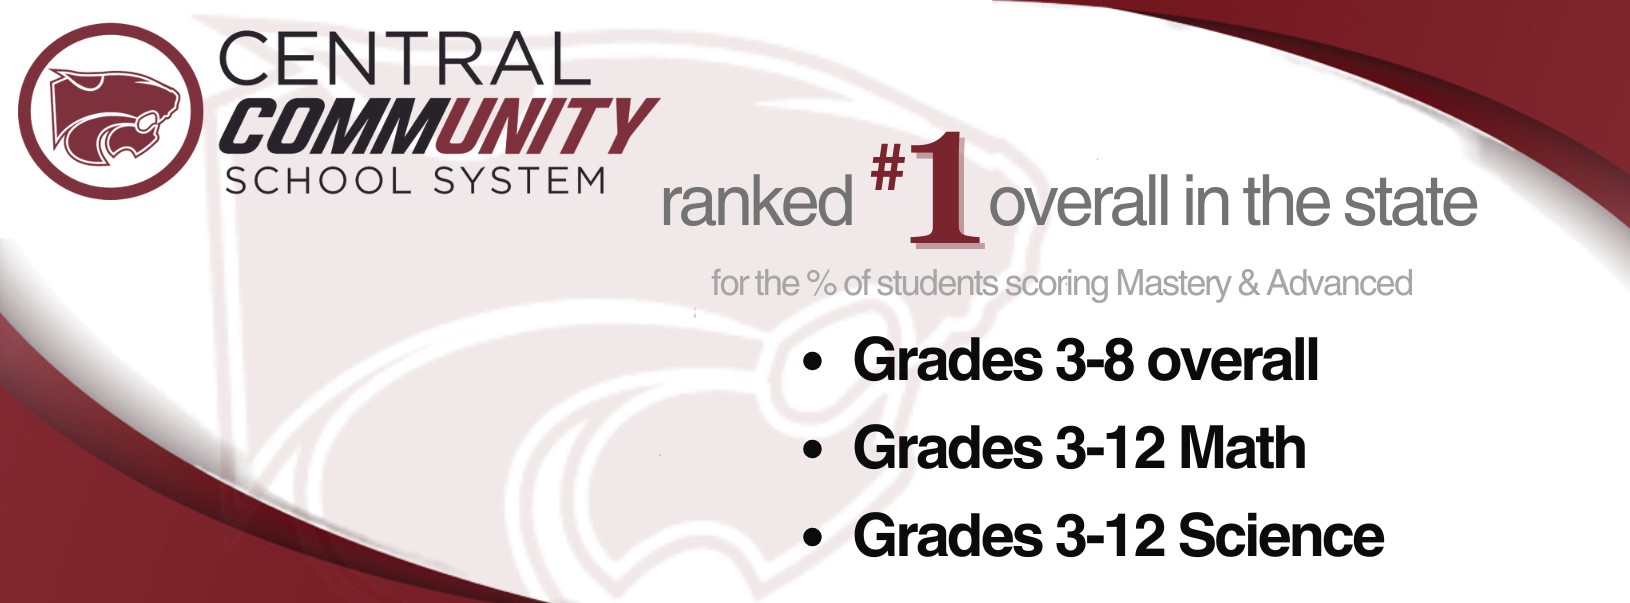 Central Community School System ranked #1 overall in the state for the % of students scoring Mastery & Advanced